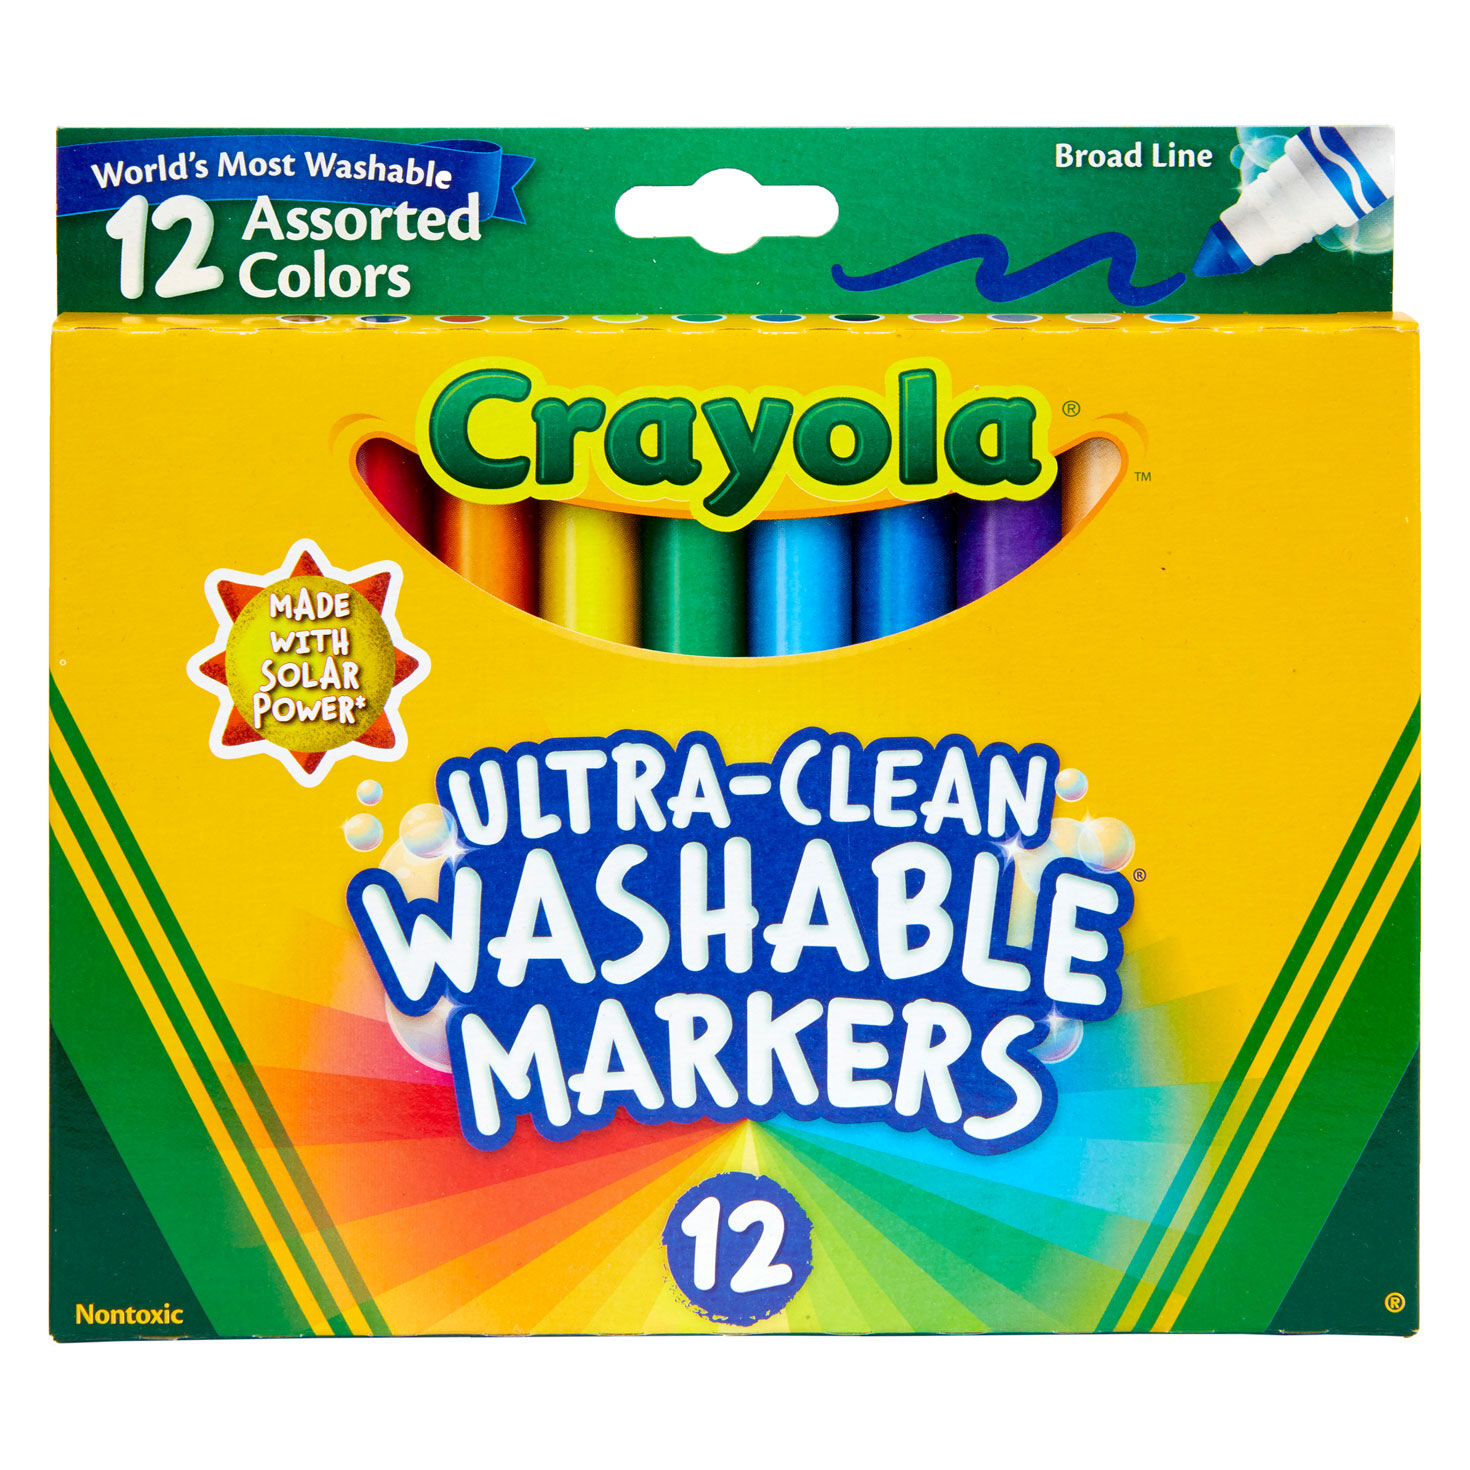 https://www.hallmark.com/dw/image/v2/AALB_PRD/on/demandware.static/-/Sites-hallmark-master/default/dw1404eaaa/images/finished-goods/products/587812/Crayola-12Count-Washable-Broad-Line-Markers_587812_01.jpg?sfrm=jpg